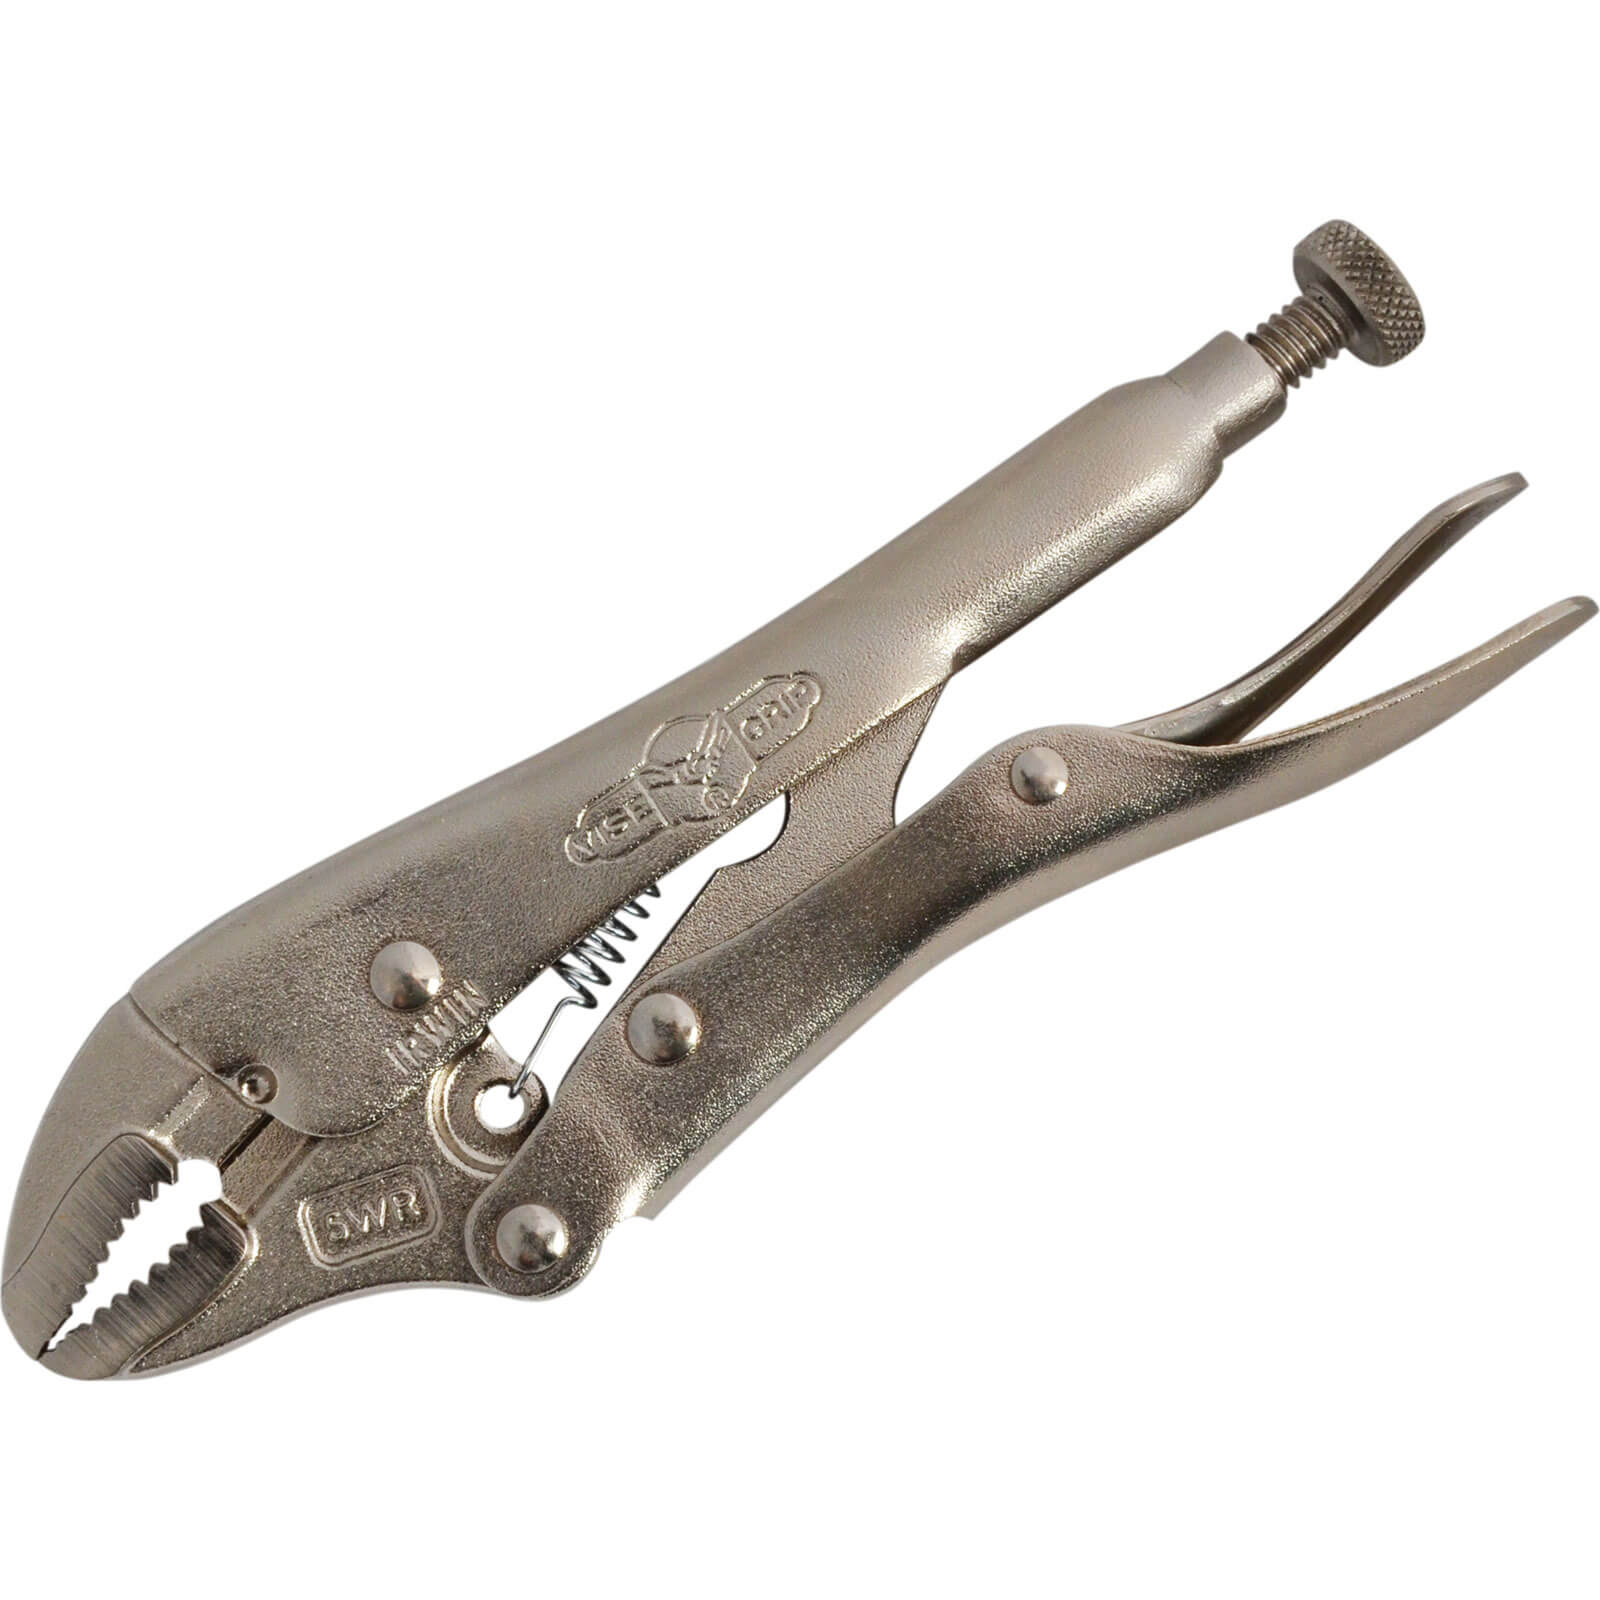 Photo of Irwin Vise Grip Curved Jaw Wire Cutting Locking Pliers 125mm